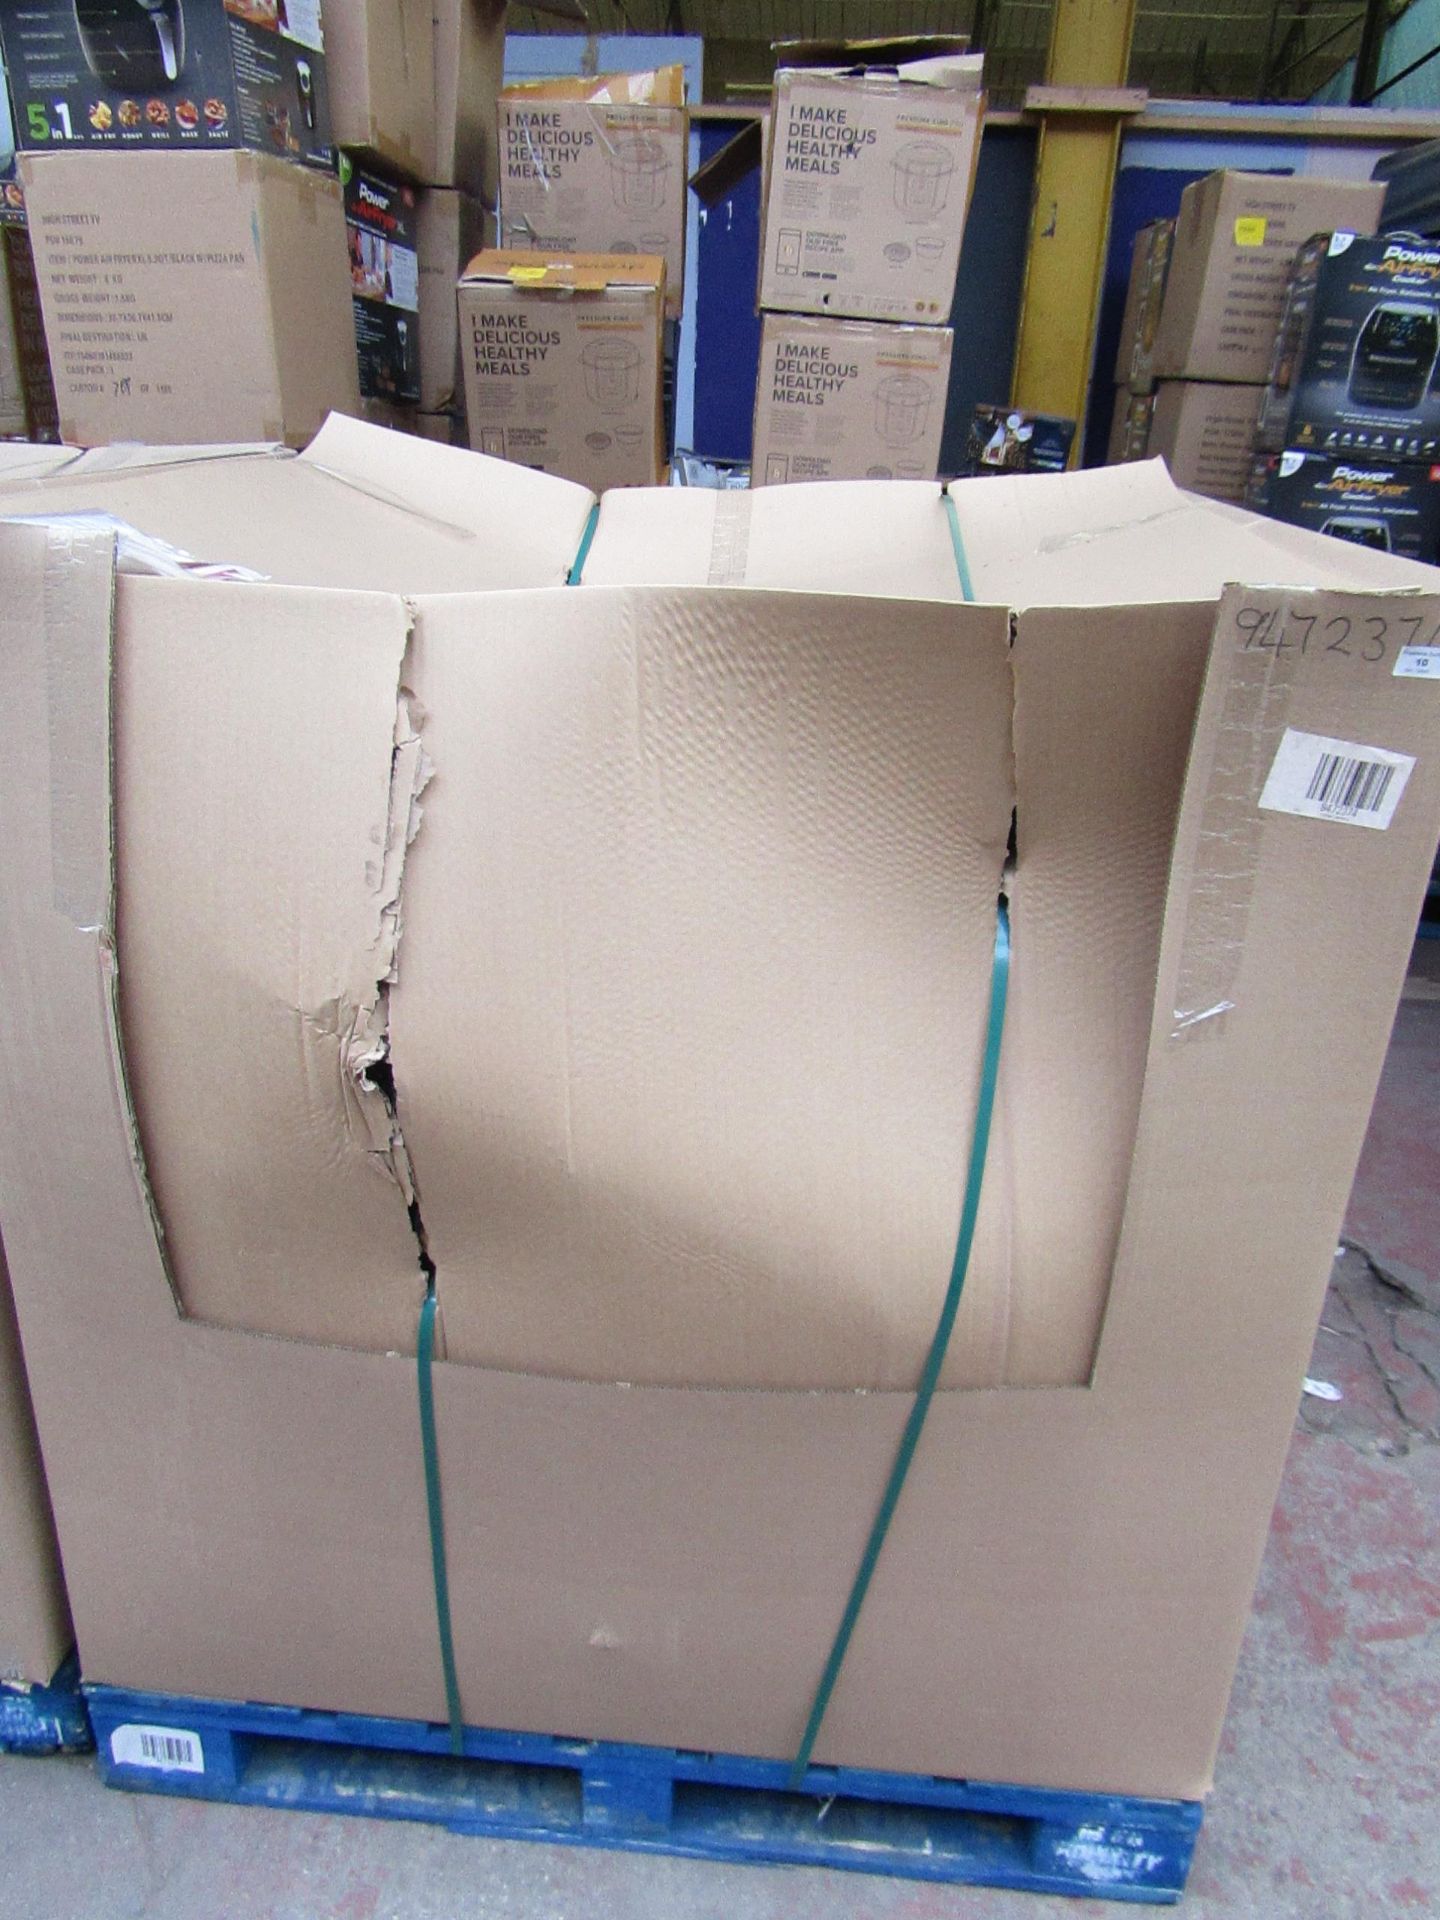 | 1x | PALLET OF UNMANIFESTED RAW CUSTOMER RETURNS FROM A LARGE ONLINE RETAILER, PLEASE NOTE THESE